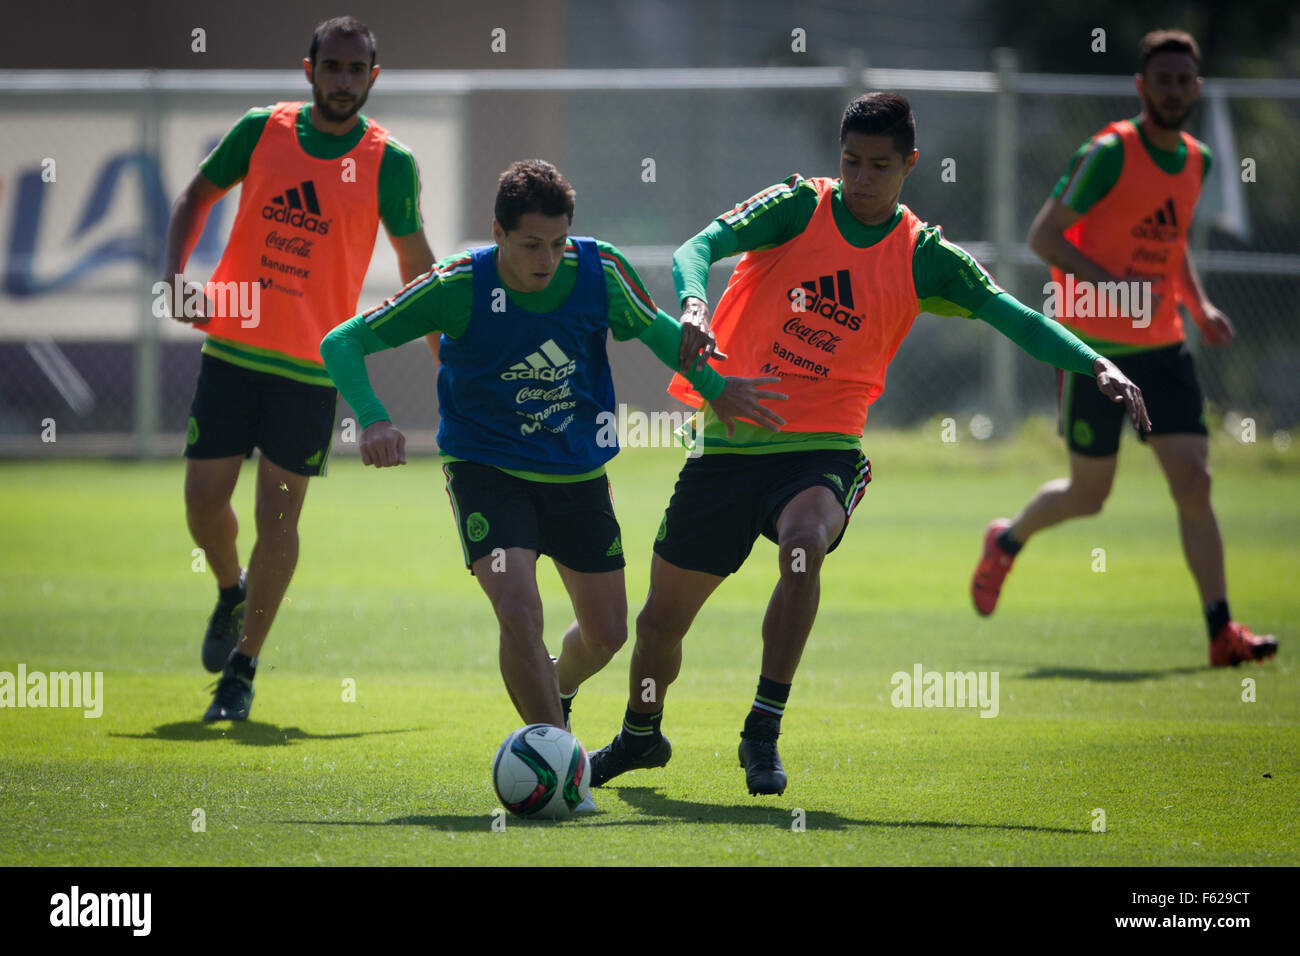 Ciudad De Mexico, Mexico. 10th Nov, 2015. Mexico's national football team players Javier Hernandez (L front) and Hugo Ayala (R front) take part in a training session in Mexico City, capital of Mexico, Nov. 10, 2015. Mexico will face El Salvador on Nov. 13, as part of the first phase of the qualifying for the 2018 FIFA World Cup Russia. Credit:  Pedro Mera/Xinhua/Alamy Live News Stock Photo